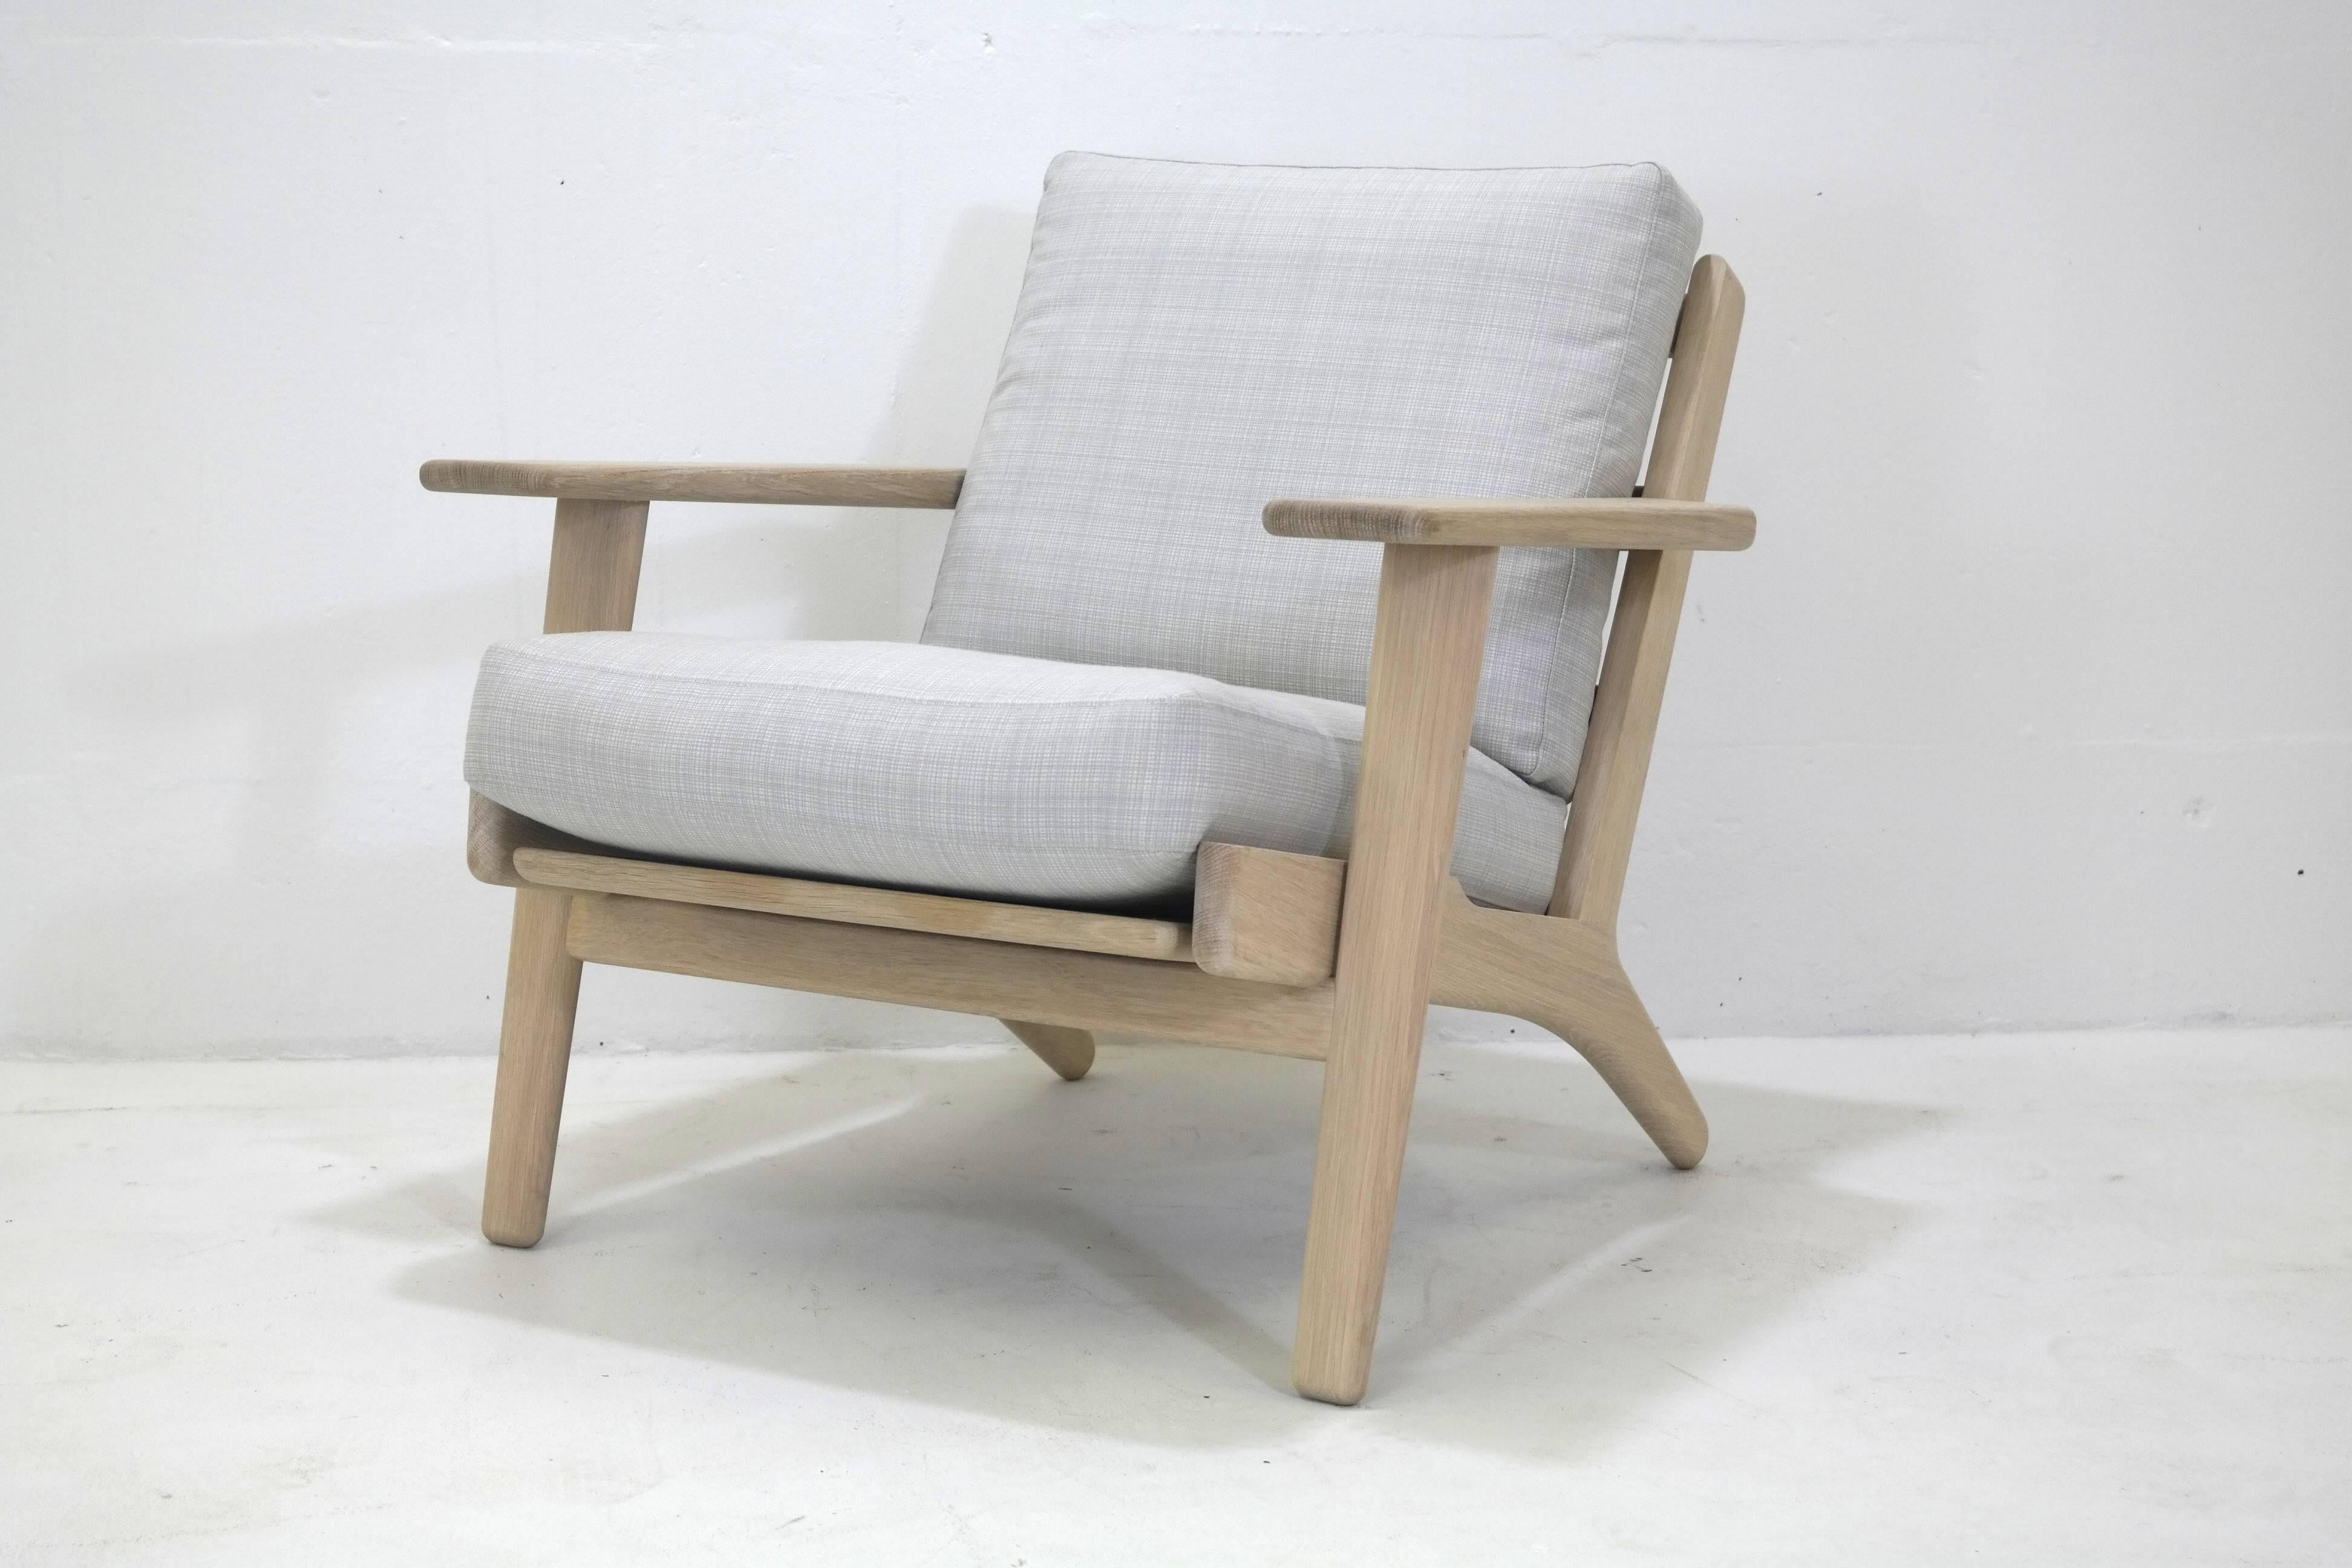 This chair is designed by Wegner in 1953 and re-issued today by the original manufacturer GETAMA of Denmark. The easy chair is featured in natural oak with off-white linen/down filled cushions. We welcome custom orders. Each piece is handmade in